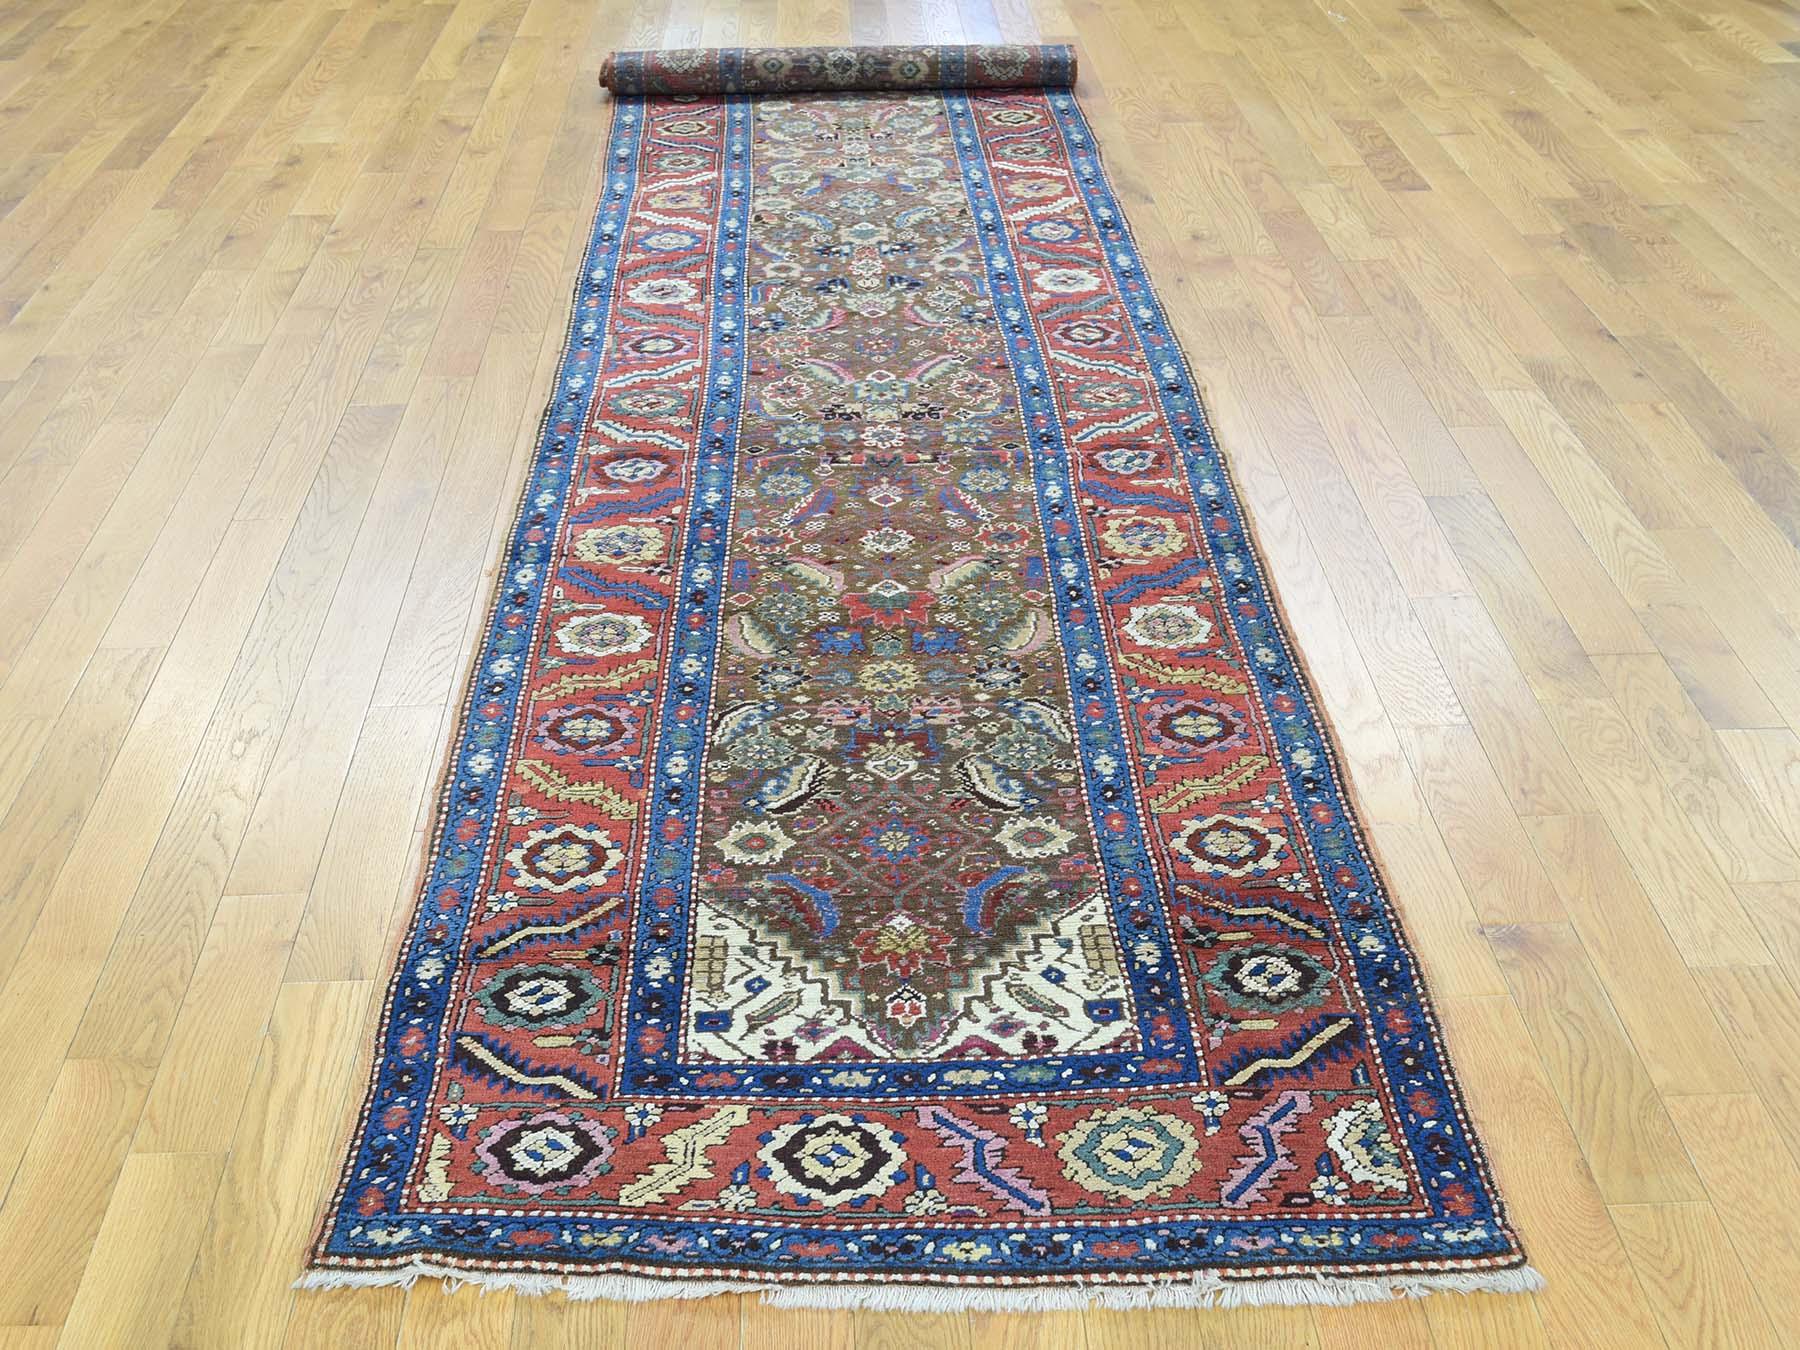 This is a genuine hand knotted oriental rug. It is not hand tufted or machine made rug. Our entire inventory is made of either hand knotted or handwoven rugs.

Start a new room with this superb antique carpet. This handcrafted Persian Bakshaish